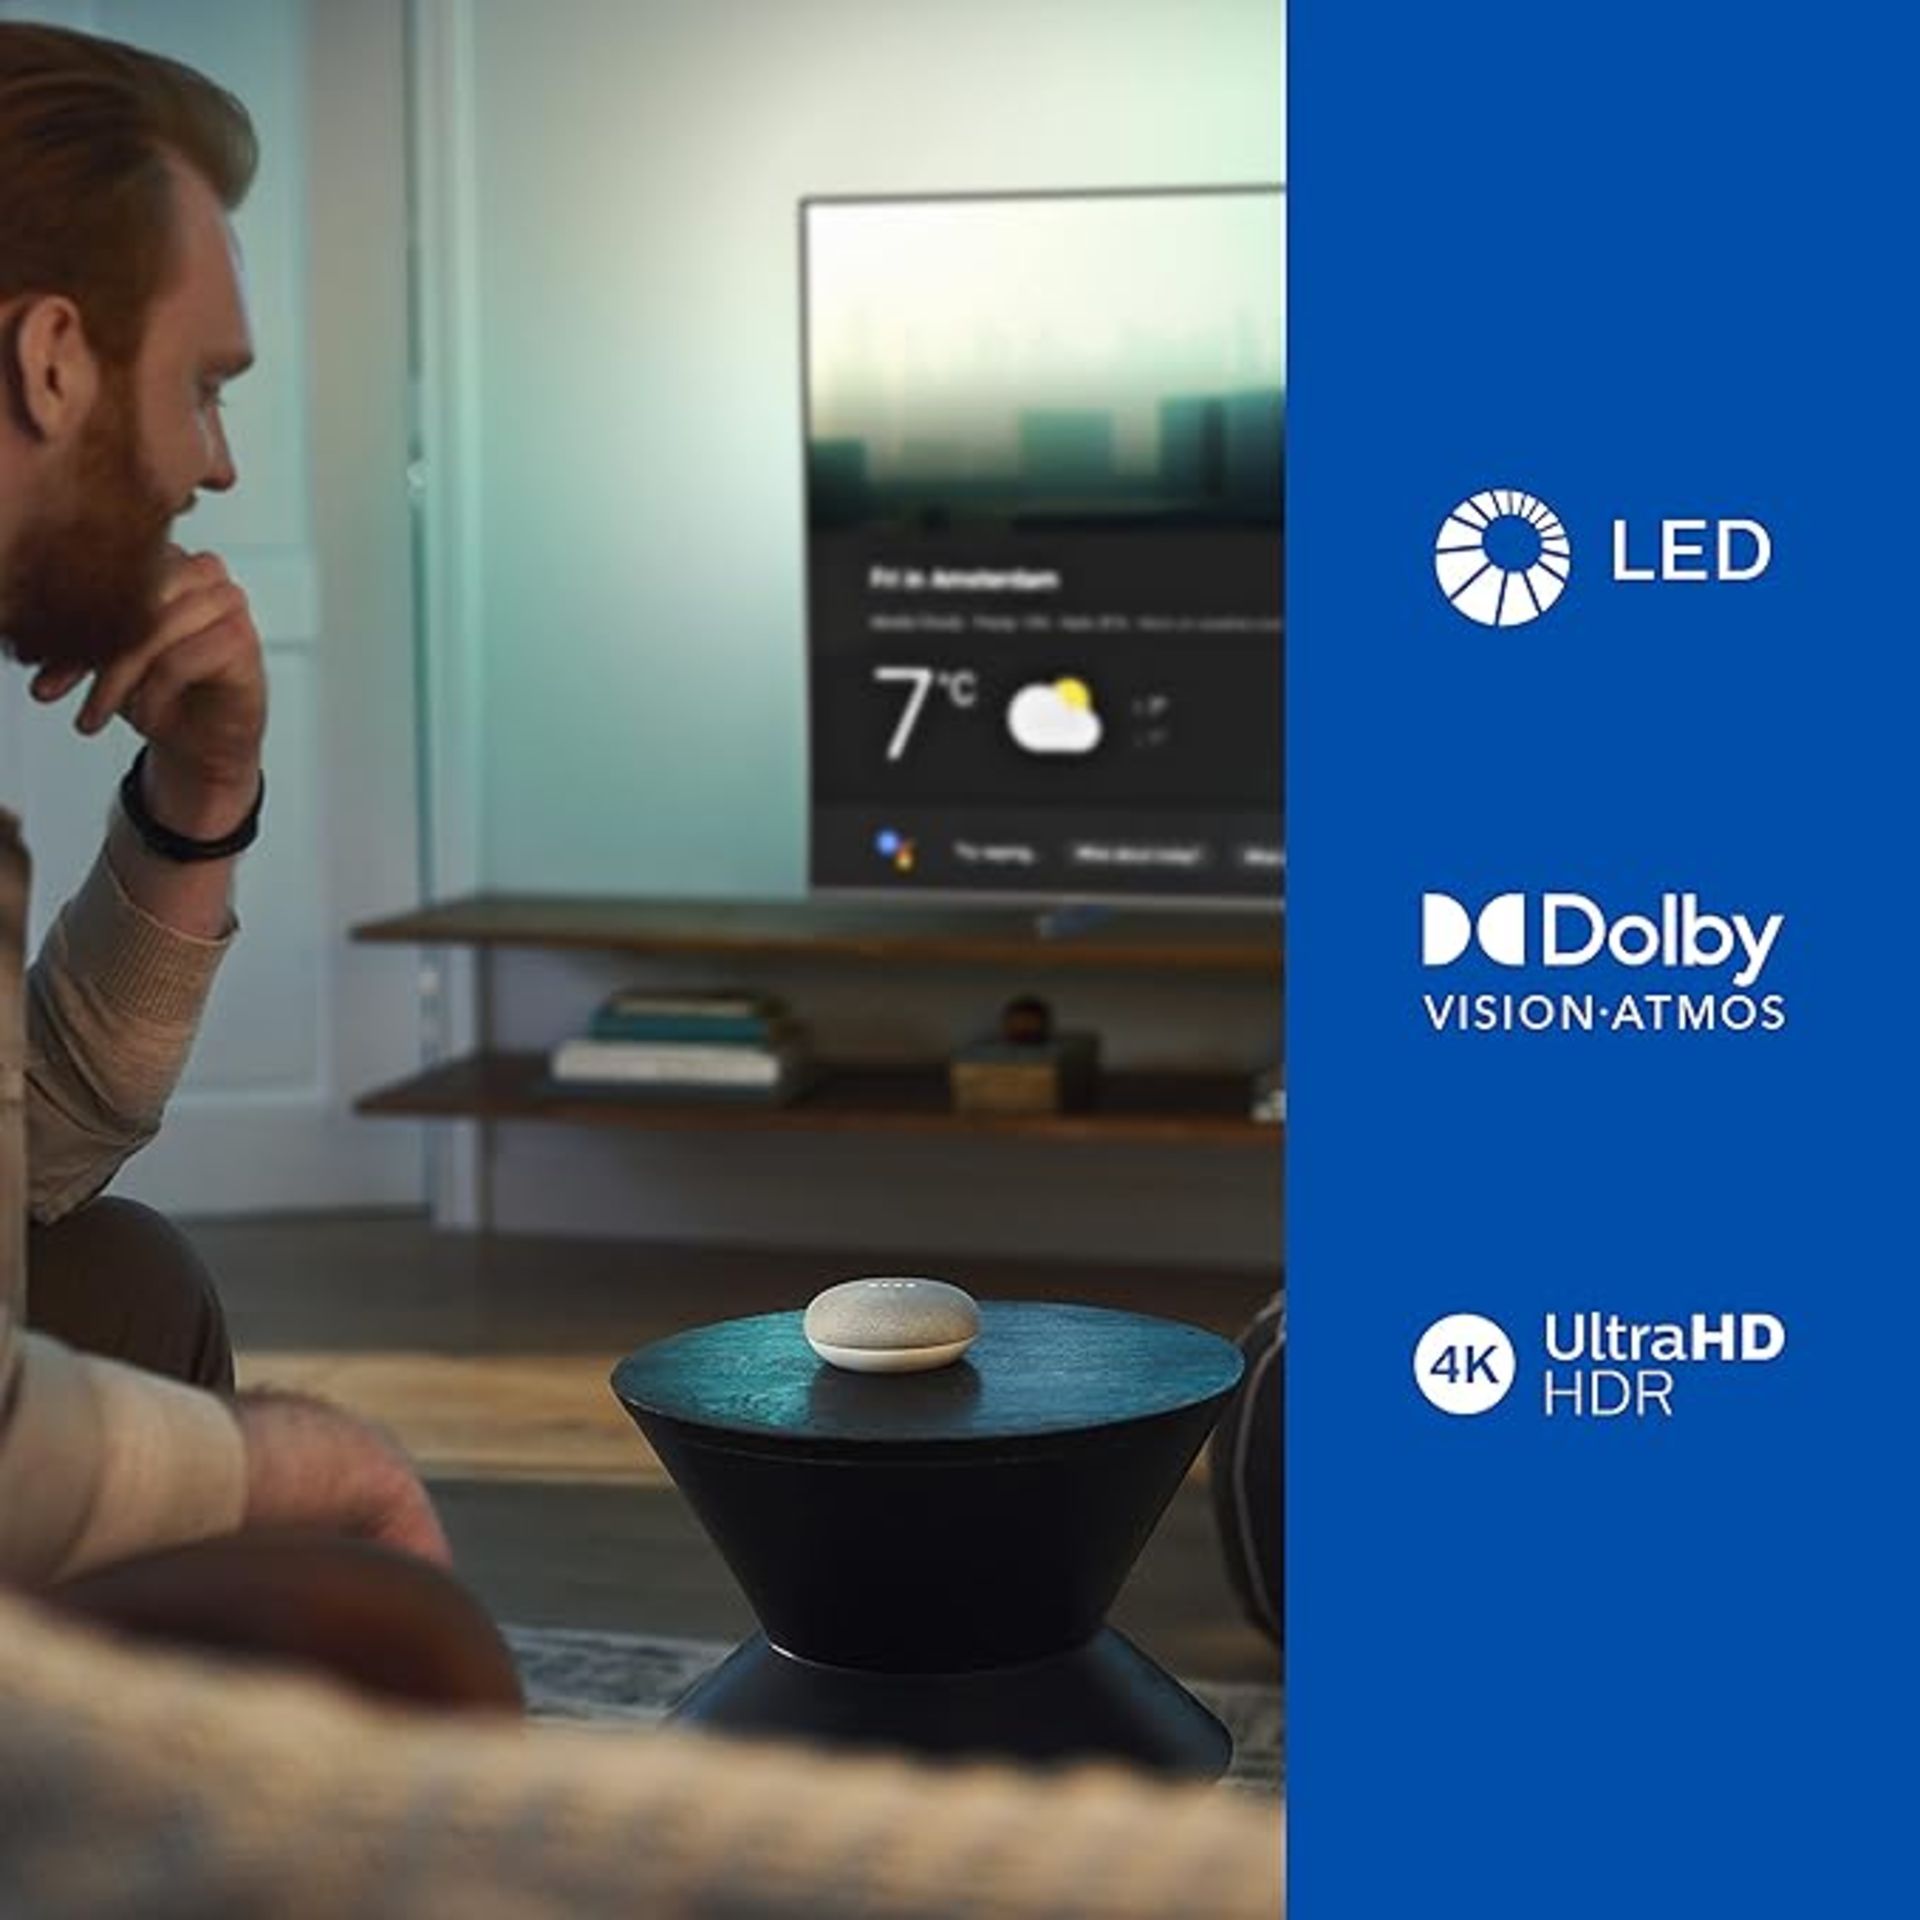 PHILIPS 50PUS7906/12 50-Inch 4K LED TV | Ambilight, UHD & HDR10+ | Dolby Vision & Dolby Atmos | - Image 2 of 2